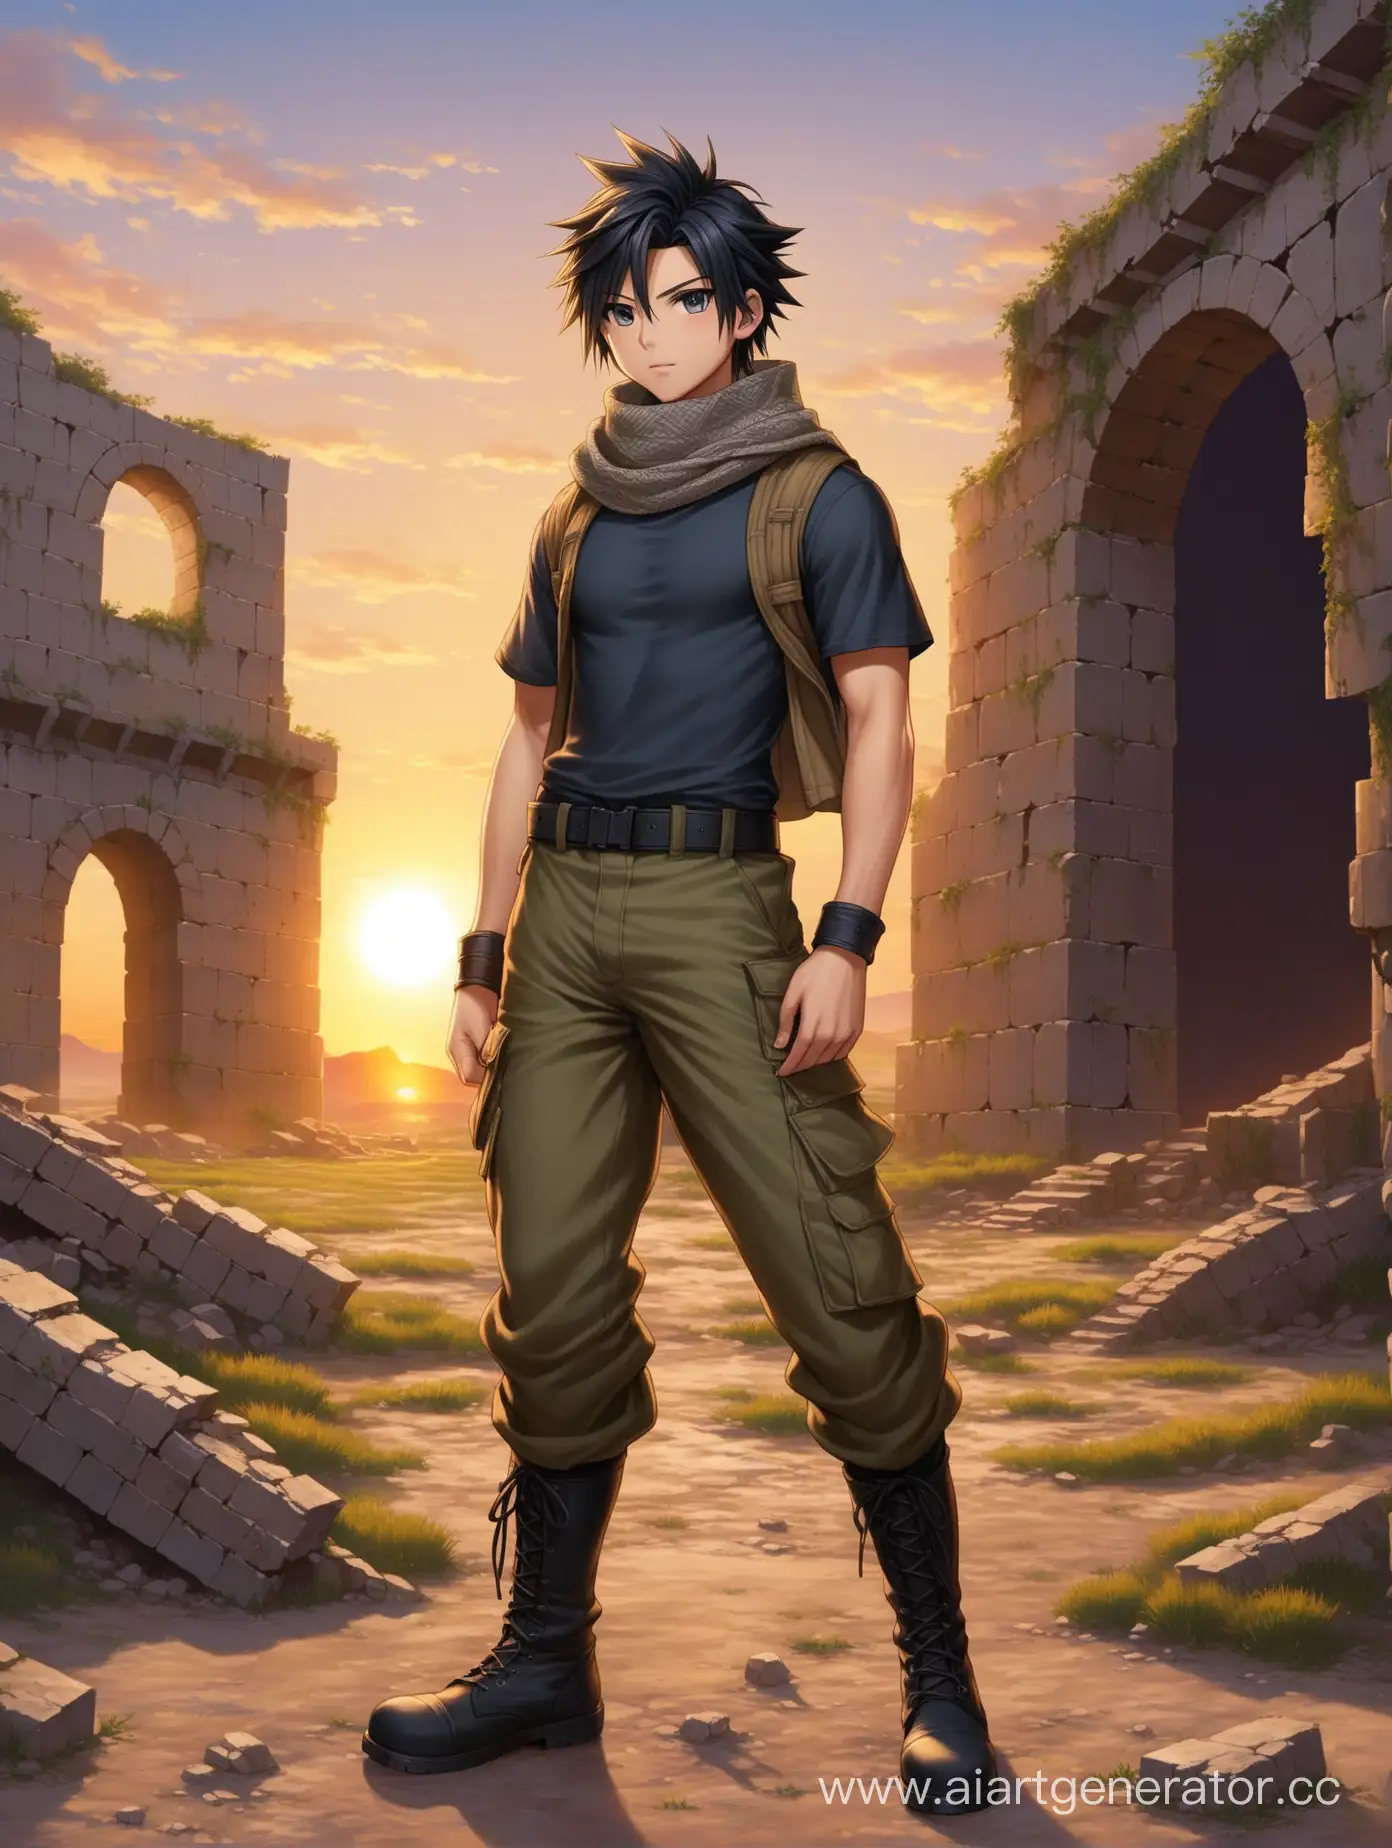 Youngster in realistic style similar to Cloud Strife, grey eyes, short black hair. Full 175 cm body image, slim figure, a bit muscular. Wearing combat boots, olive field trousers, darkblue t-shirt, tan ACU fieldjacket, grey arab scarf. Stands in fantasy ruins at the sunset.